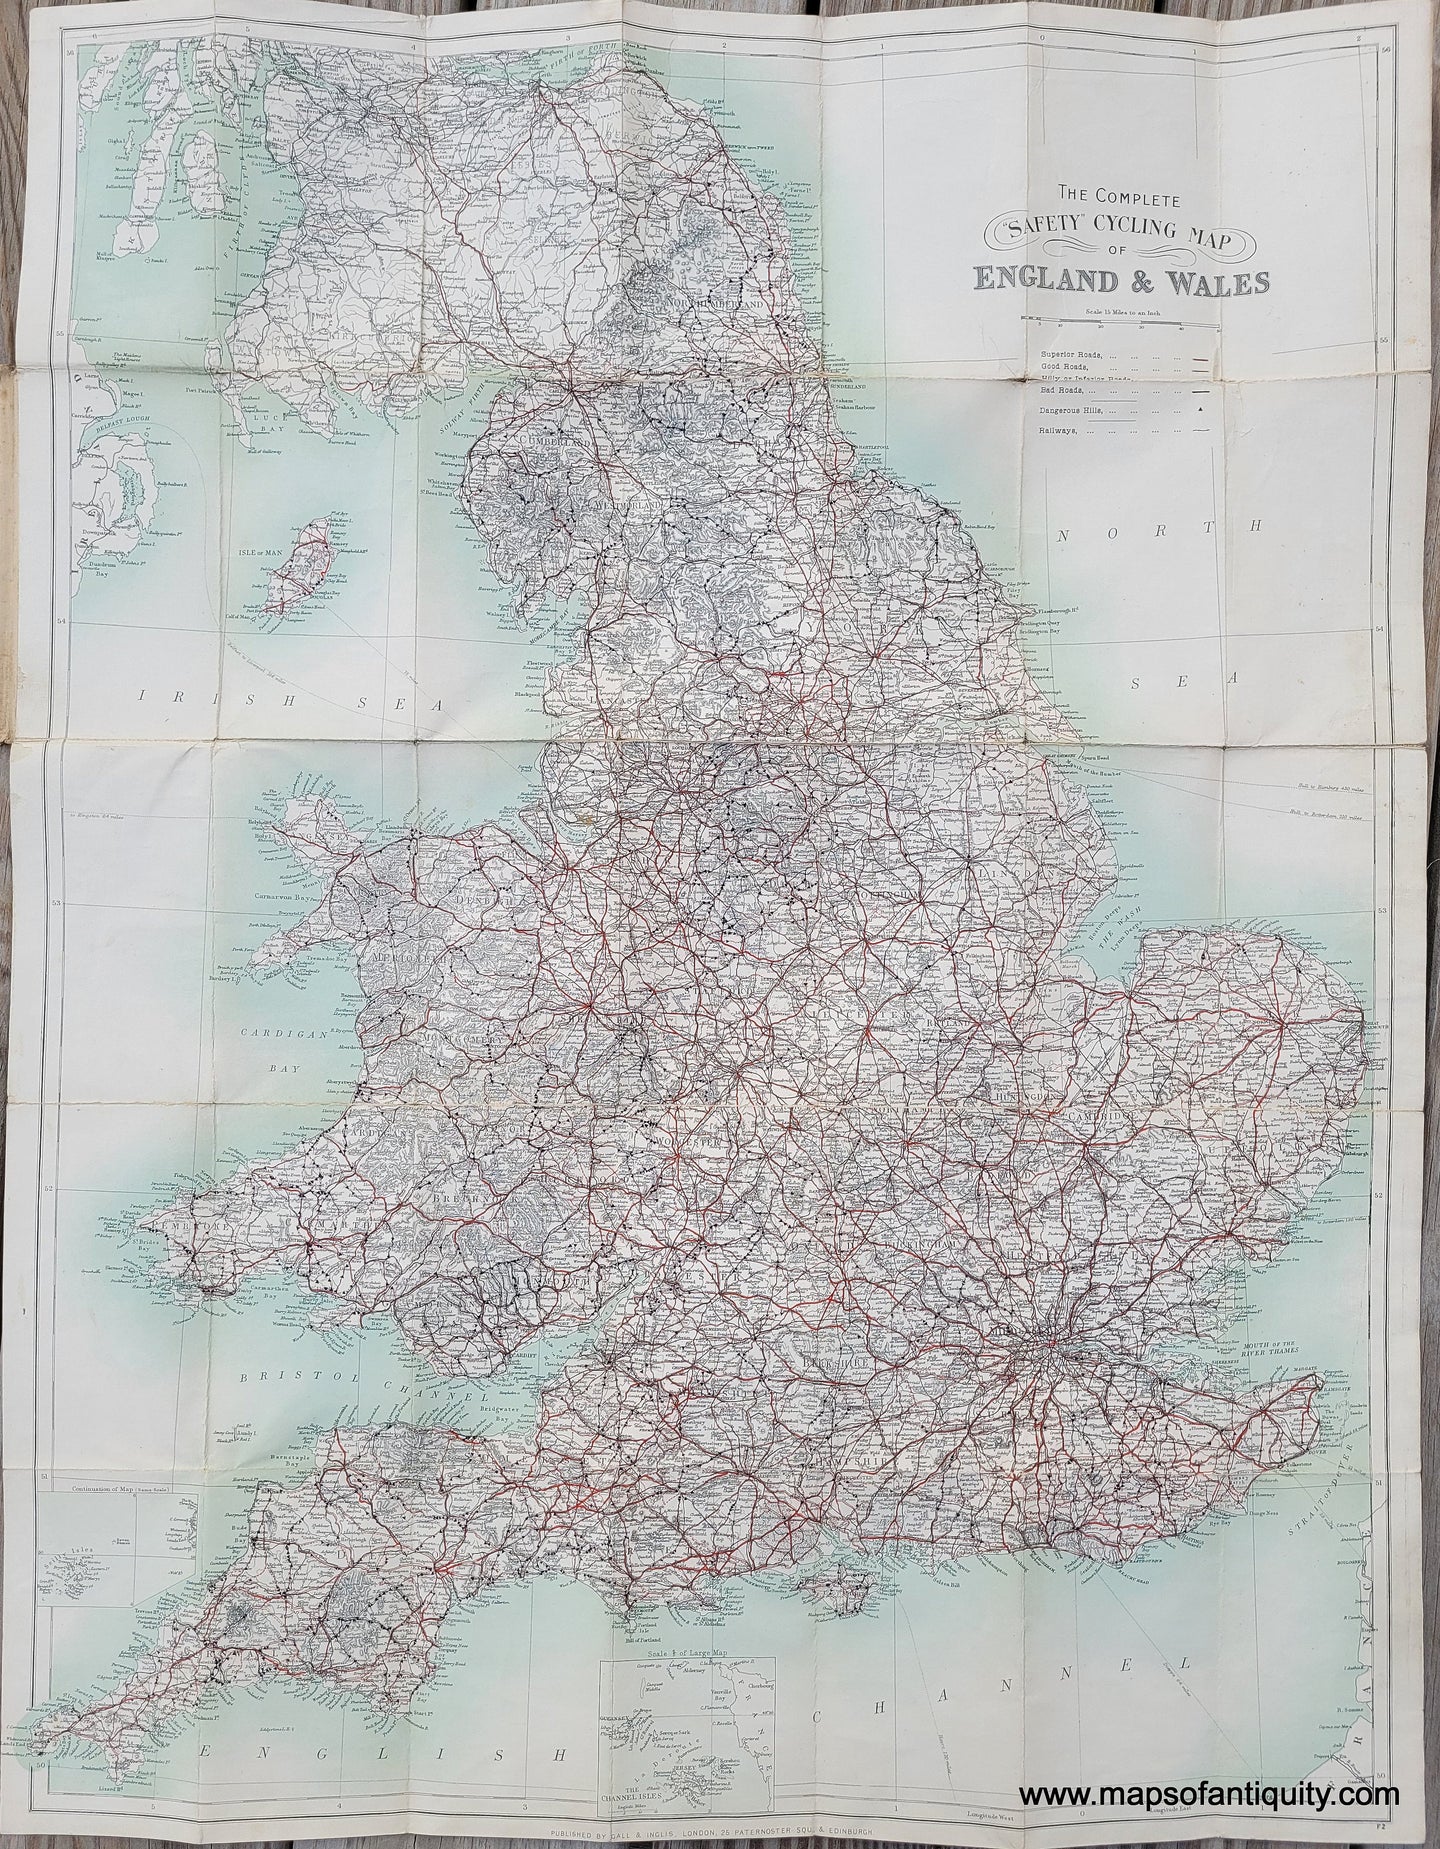 Genuine-Antique-Folding-Map-The-Complete-Safety-Cycling-Map-of-England-Wales-1905-Galls-Inglis-Maps-Of-Antiquity